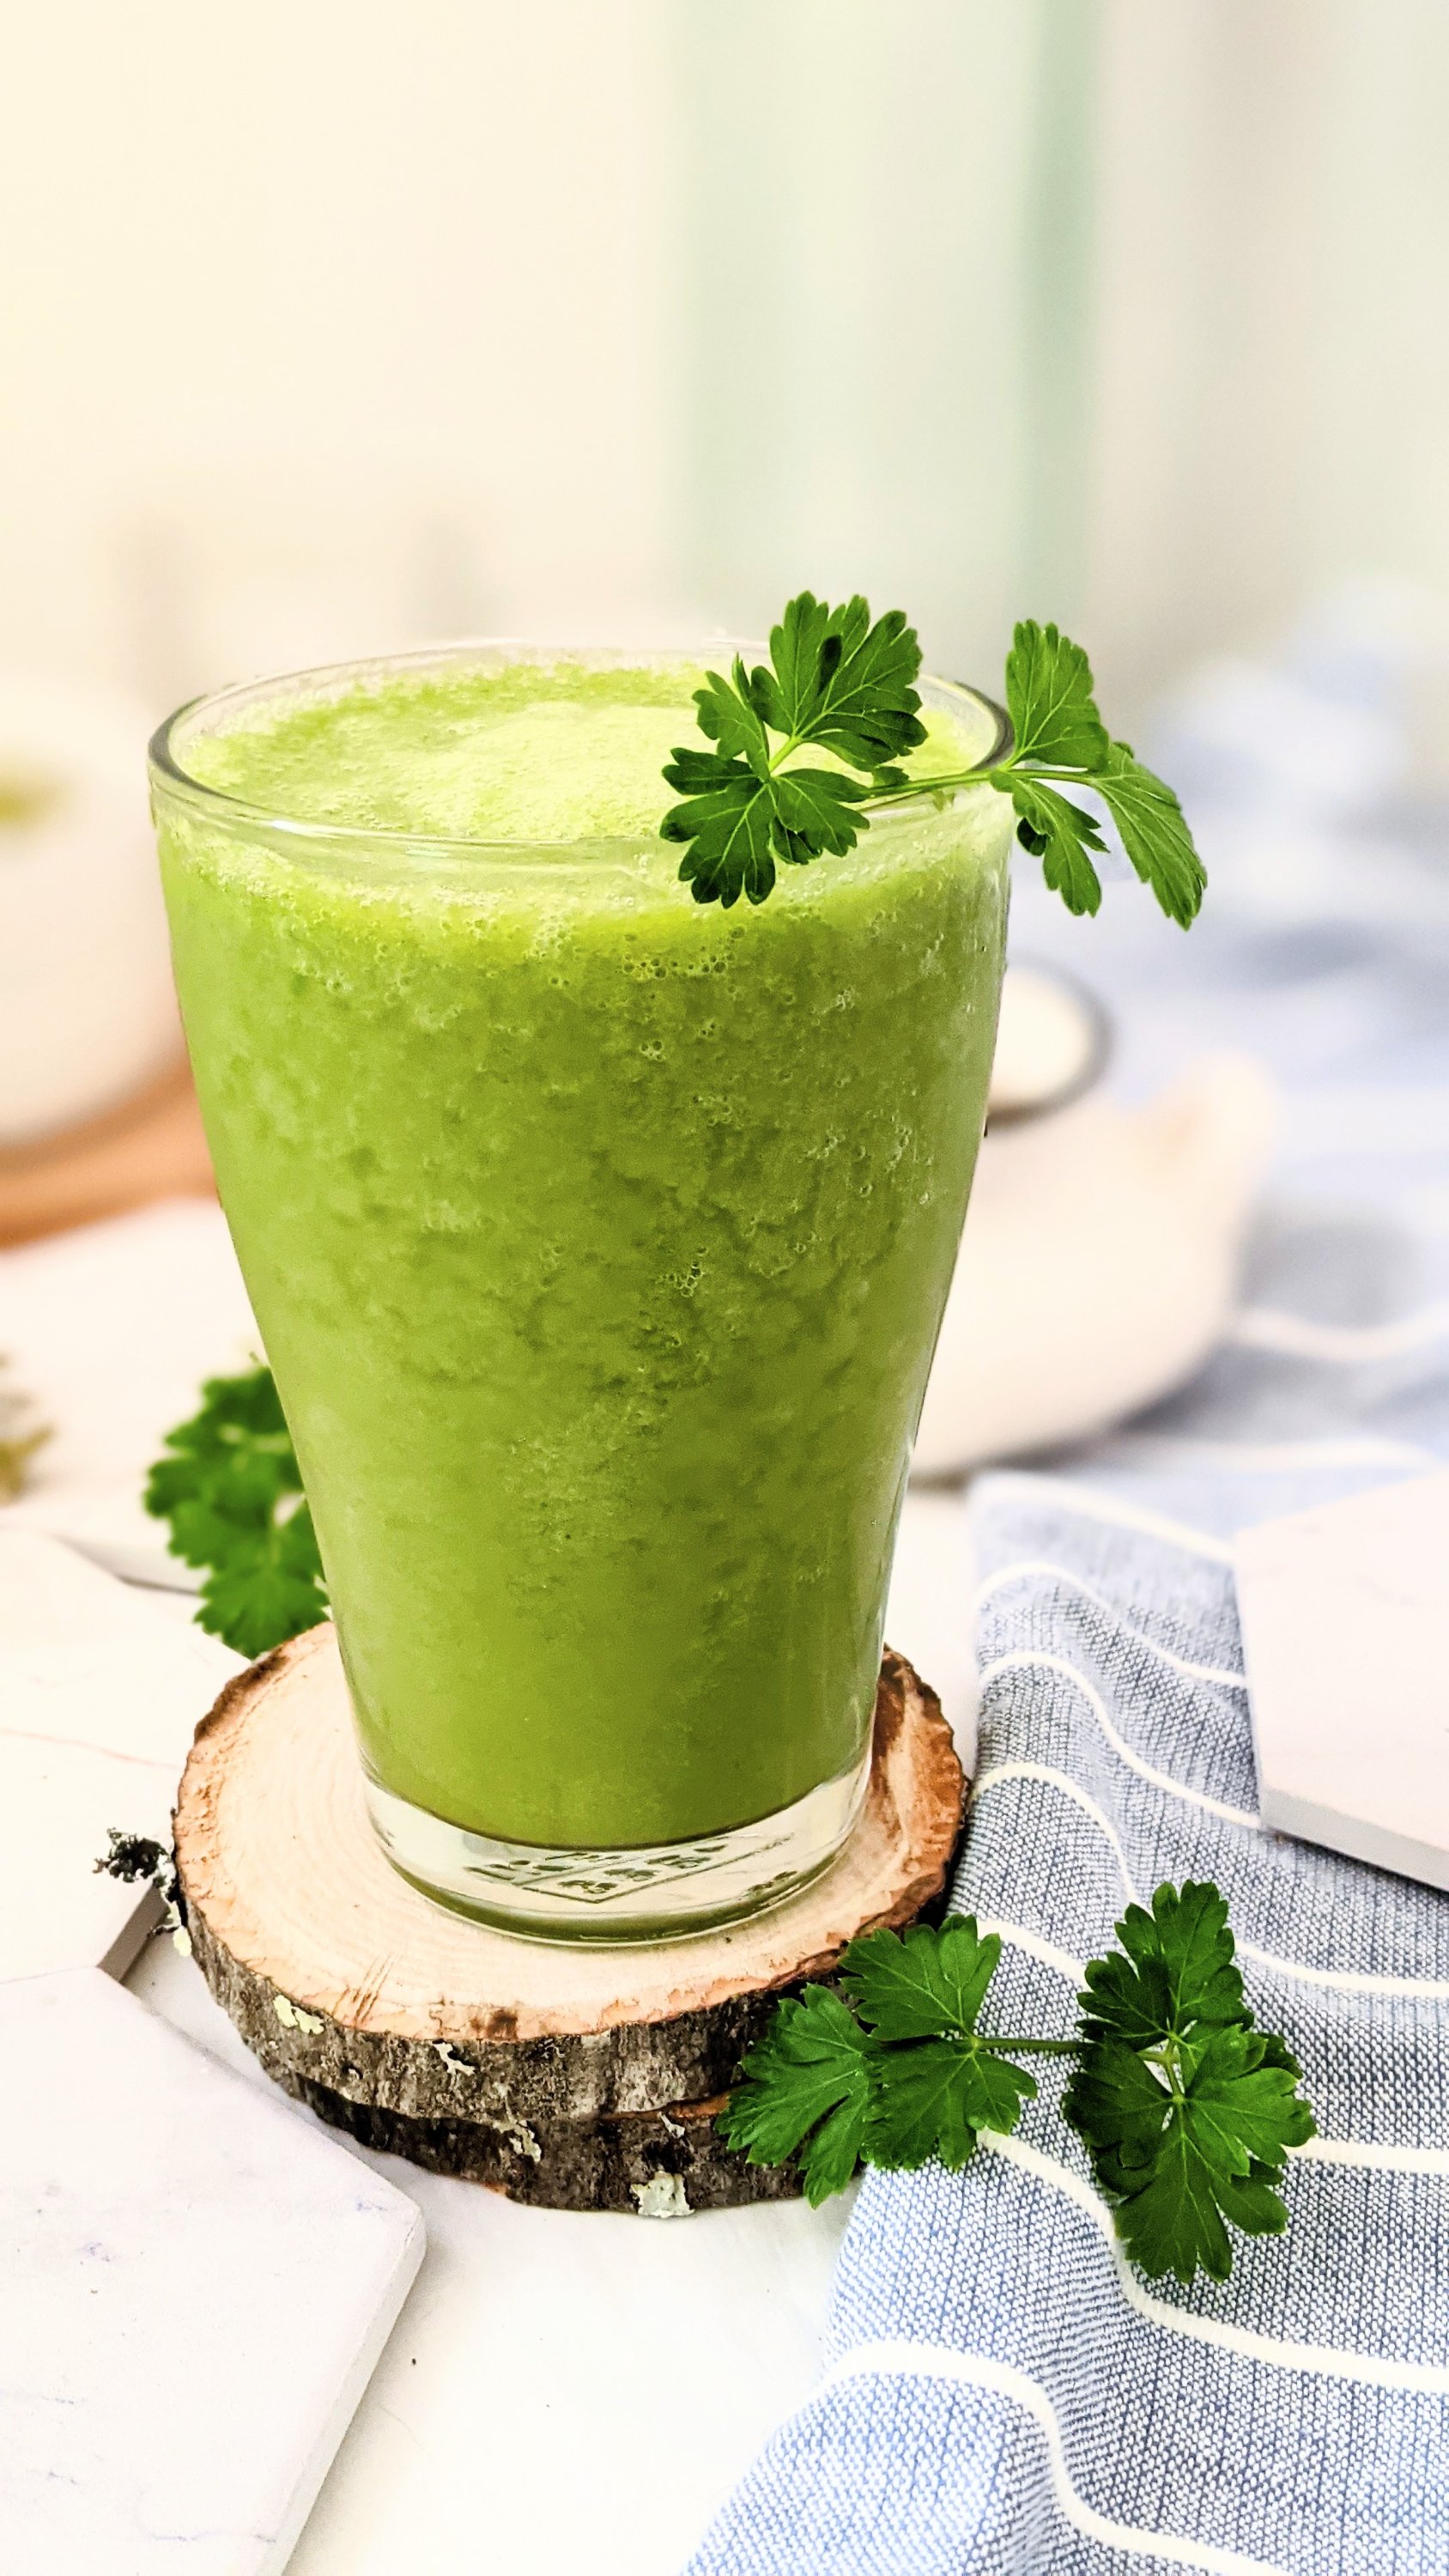 raw vegan parsley recipes smoothies with parsley stems and leaves for healthy benefits of parsley for breakfast recipes sweet parsley recipes healthy ways to eat more parsley